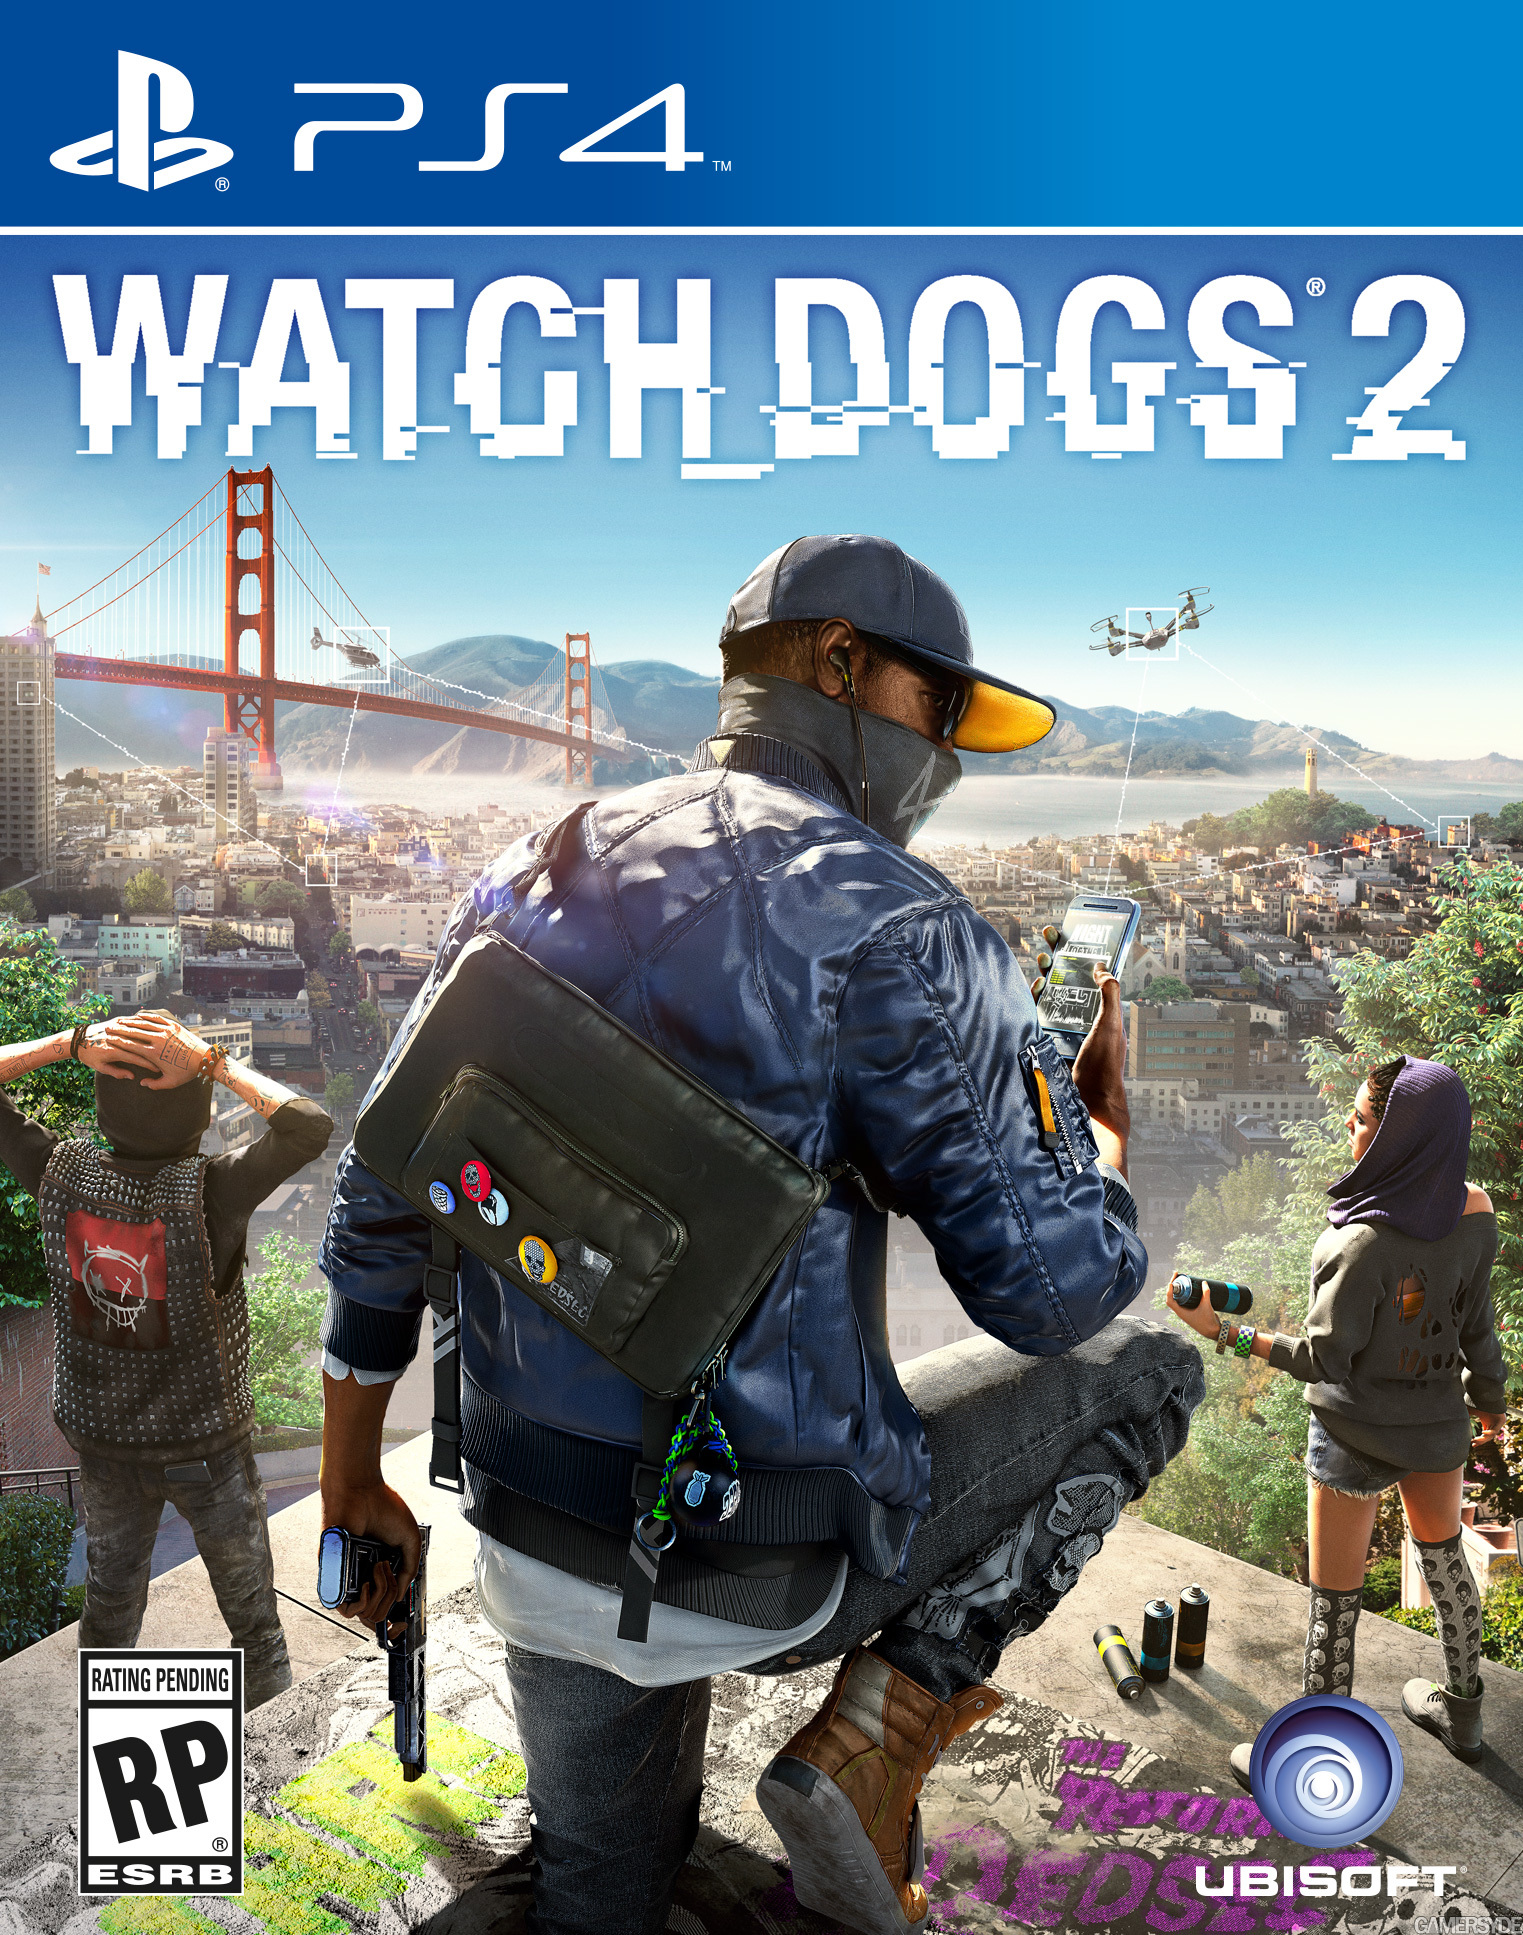 Watch Dogs 2 - Gold Edition [PS4] 5.05 / 6.72 / 7.02 [EUR] (2016) [Русский] (v1.17)